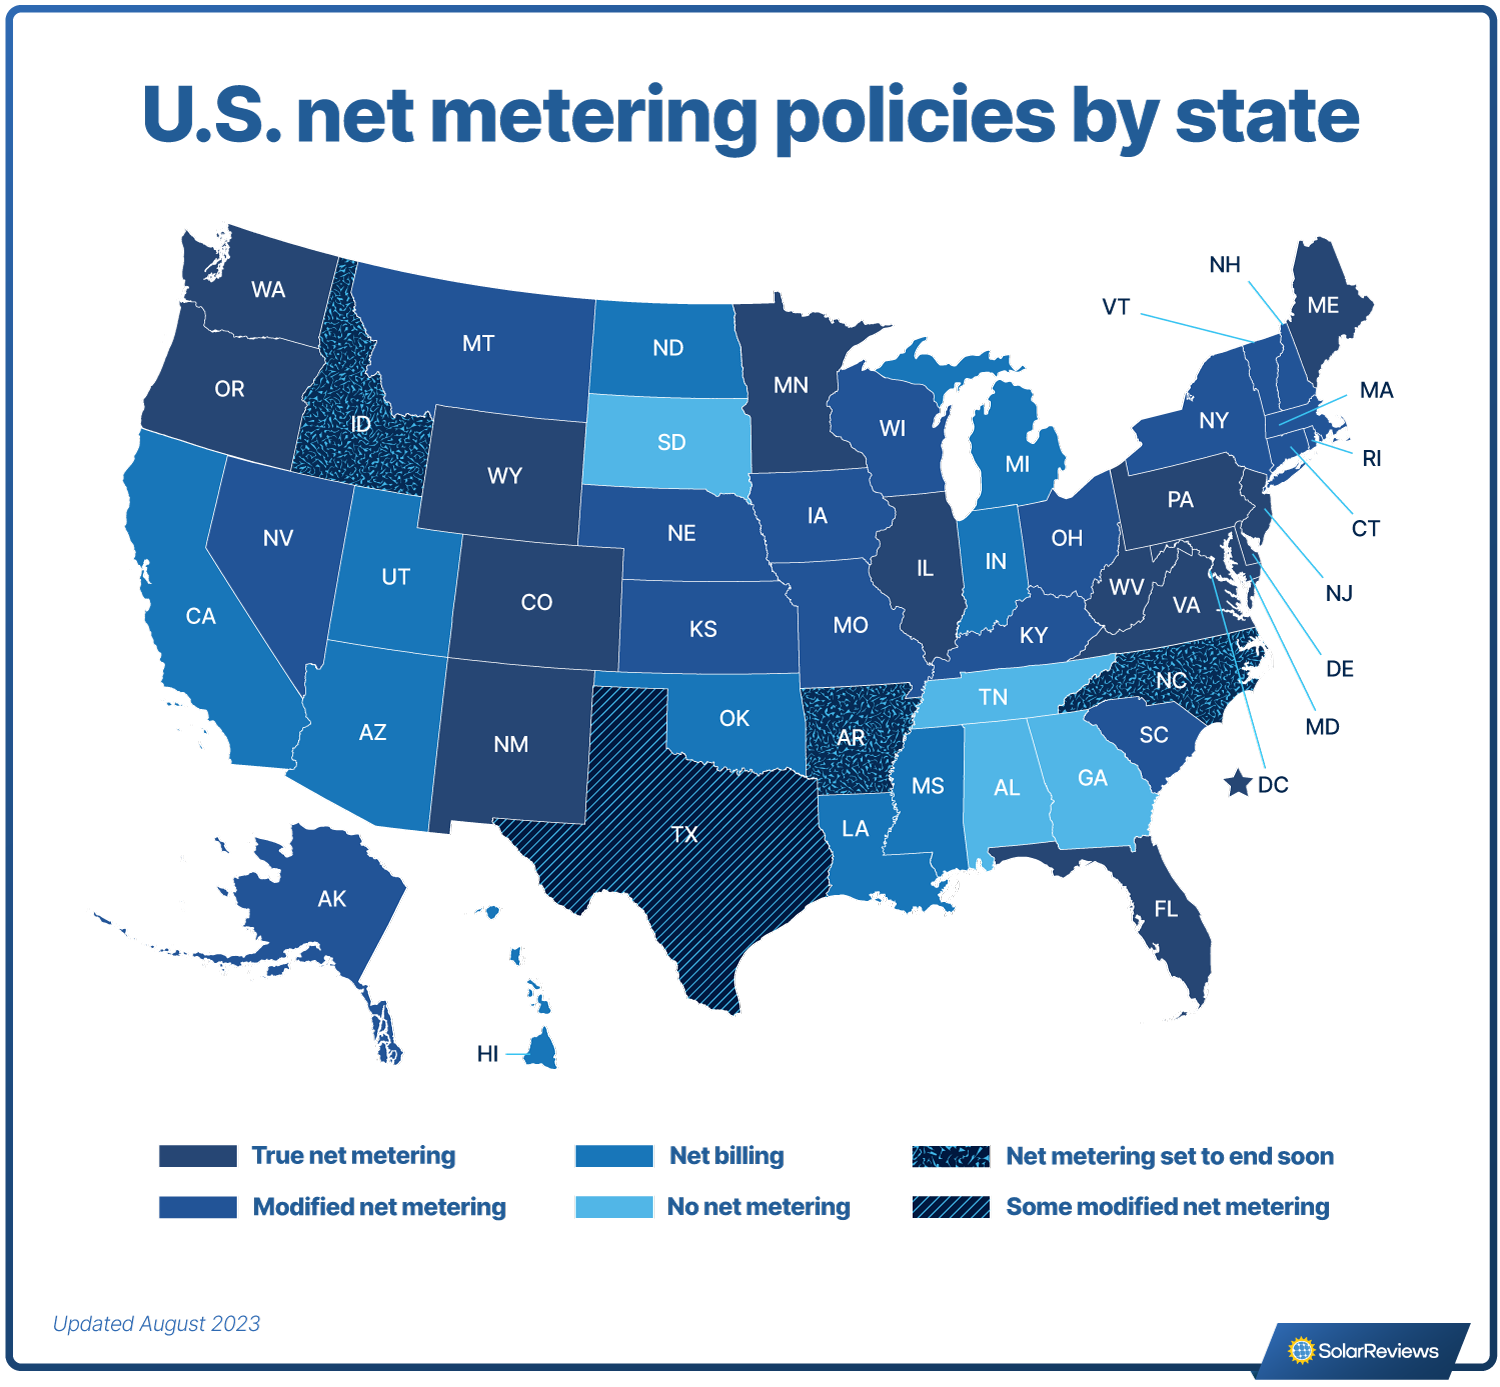 A map of the United States highlighting states with true net metering, modified net metering, net billing, programs that are ending soon, and states with no net metering policy at all. 